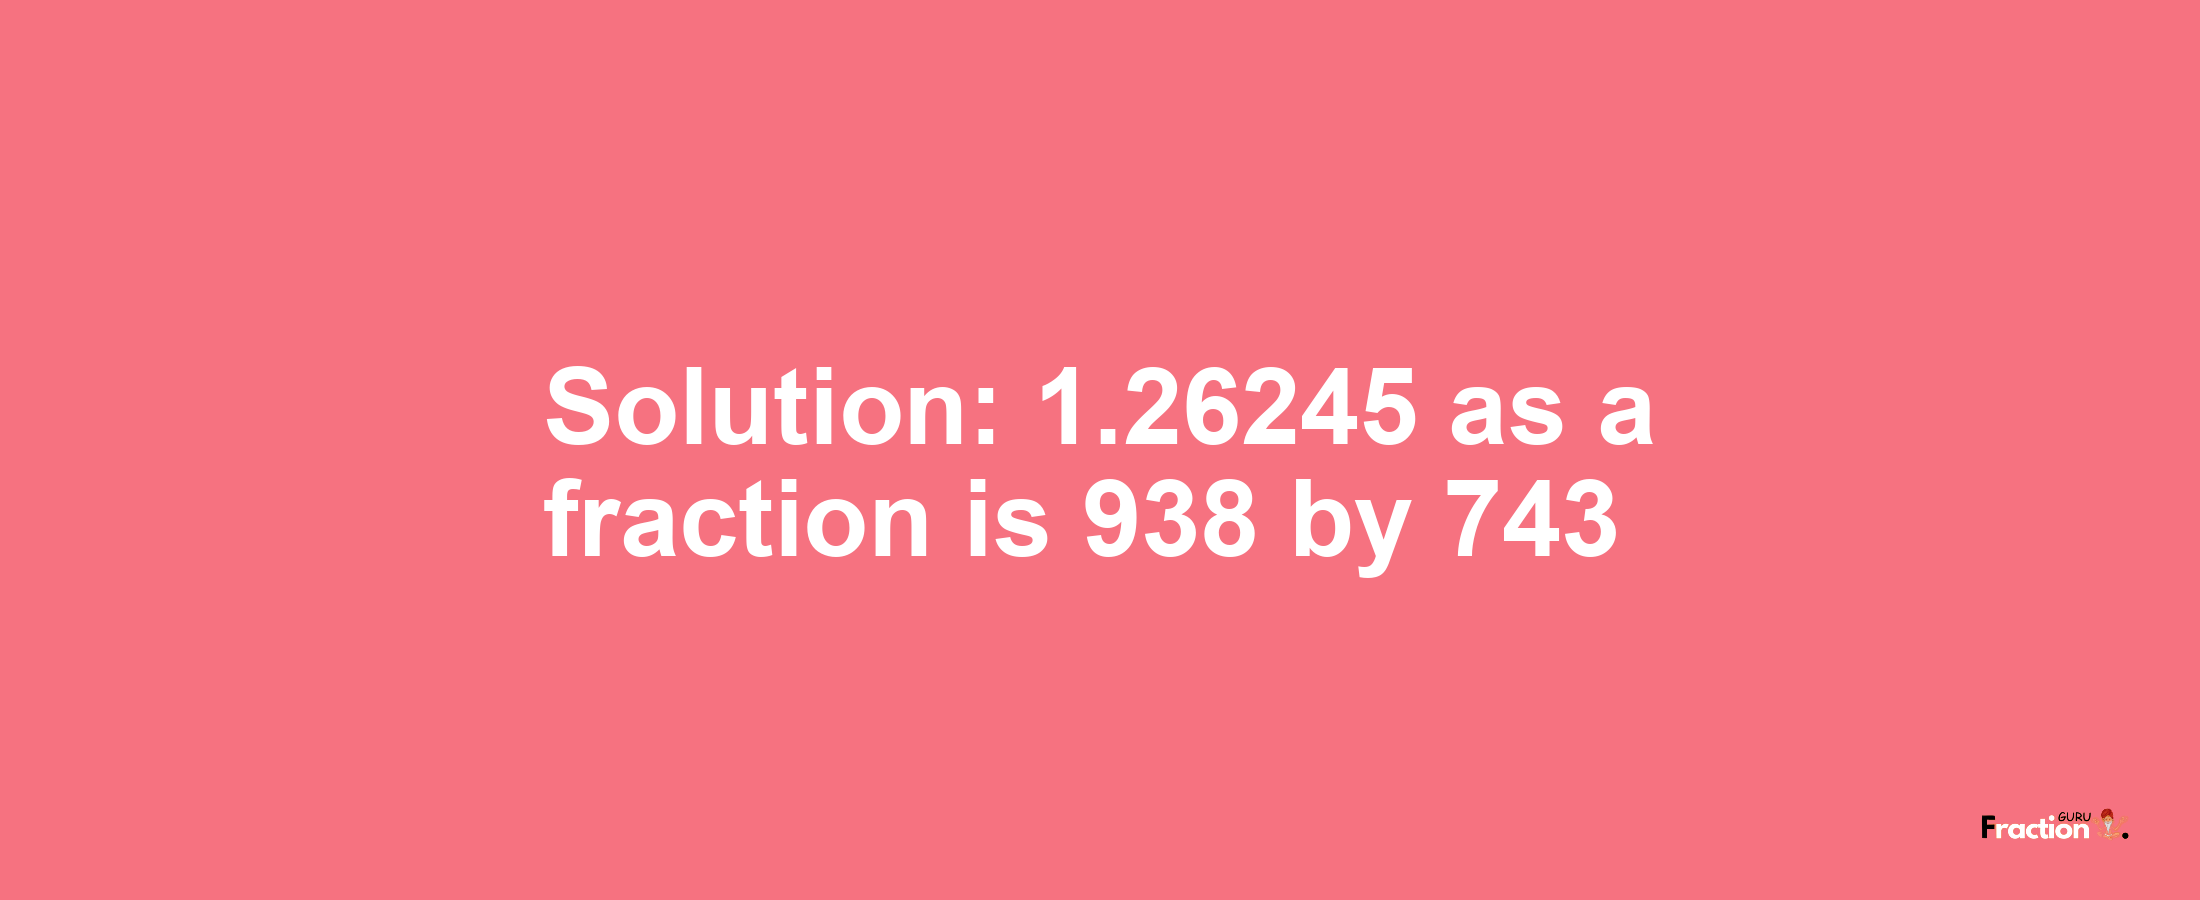 Solution:1.26245 as a fraction is 938/743